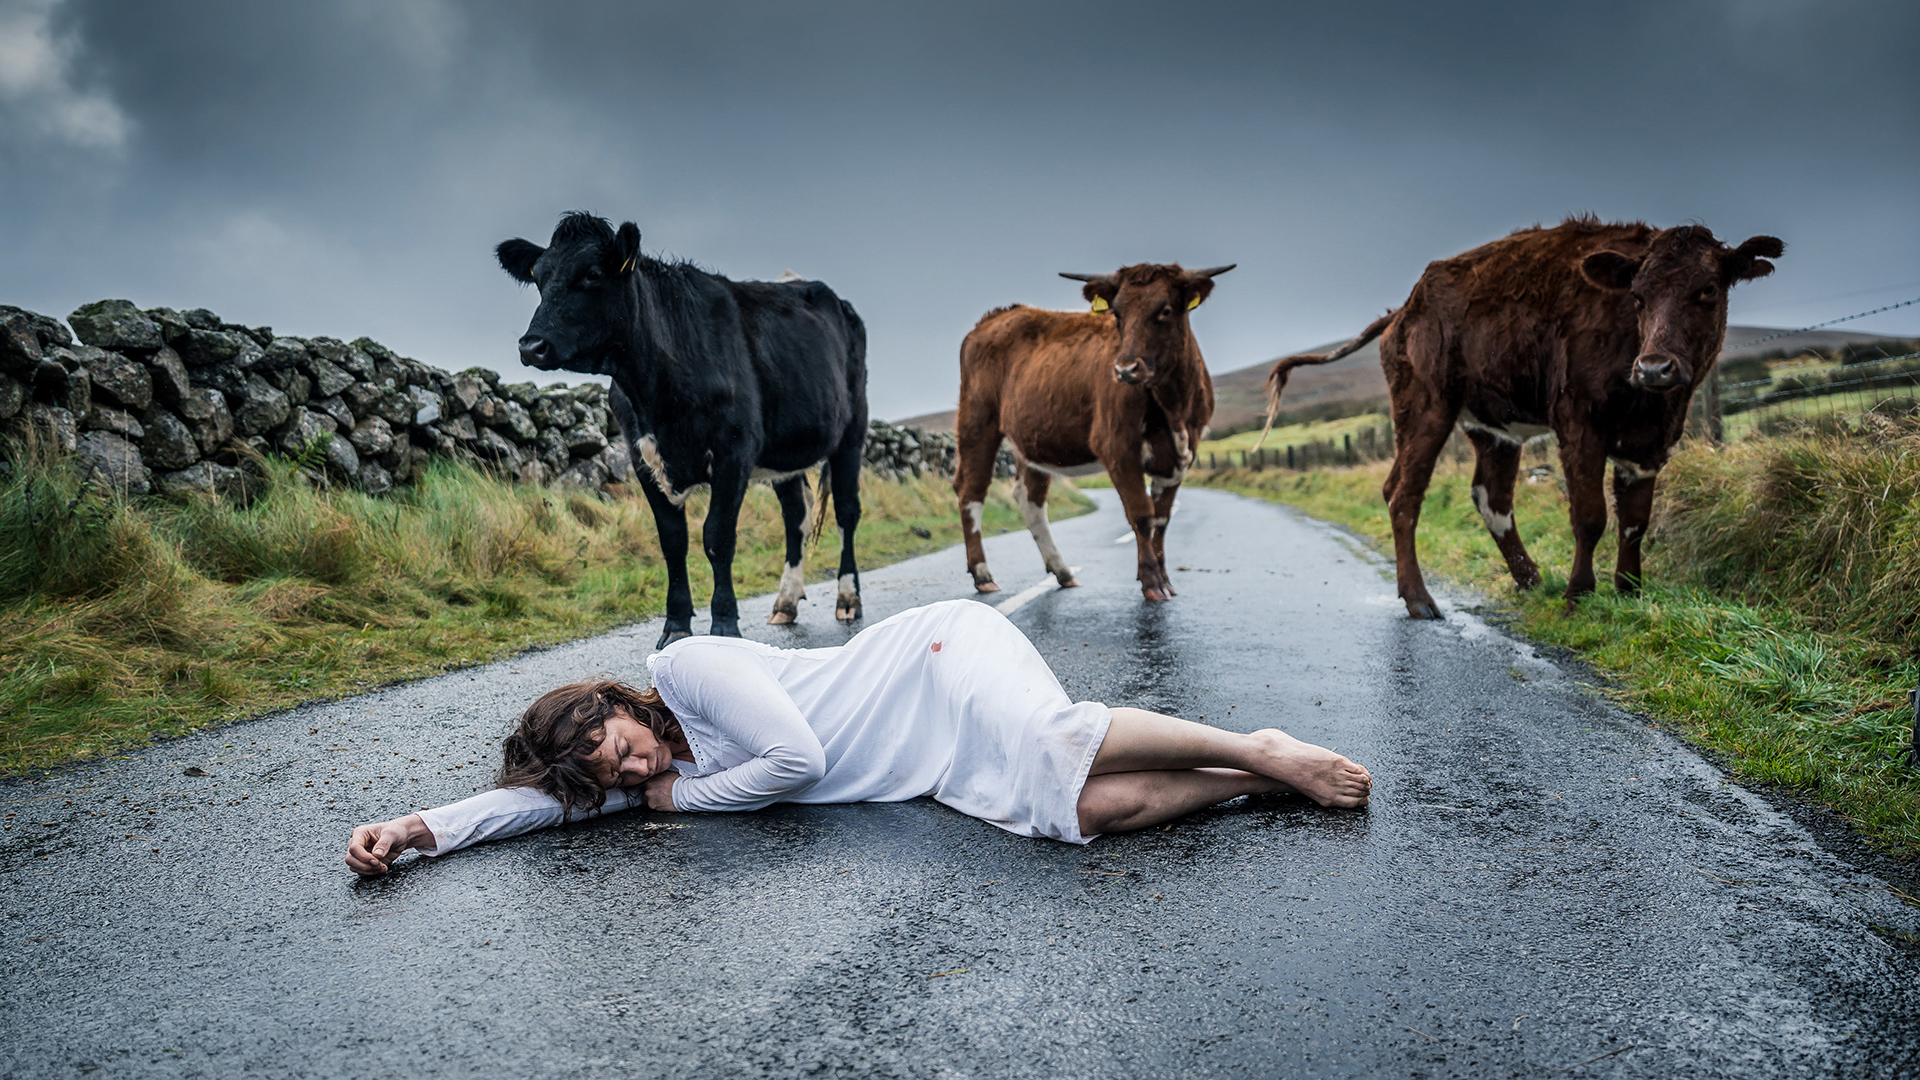 A woman lies on the road in a nightgown surrounded by cows